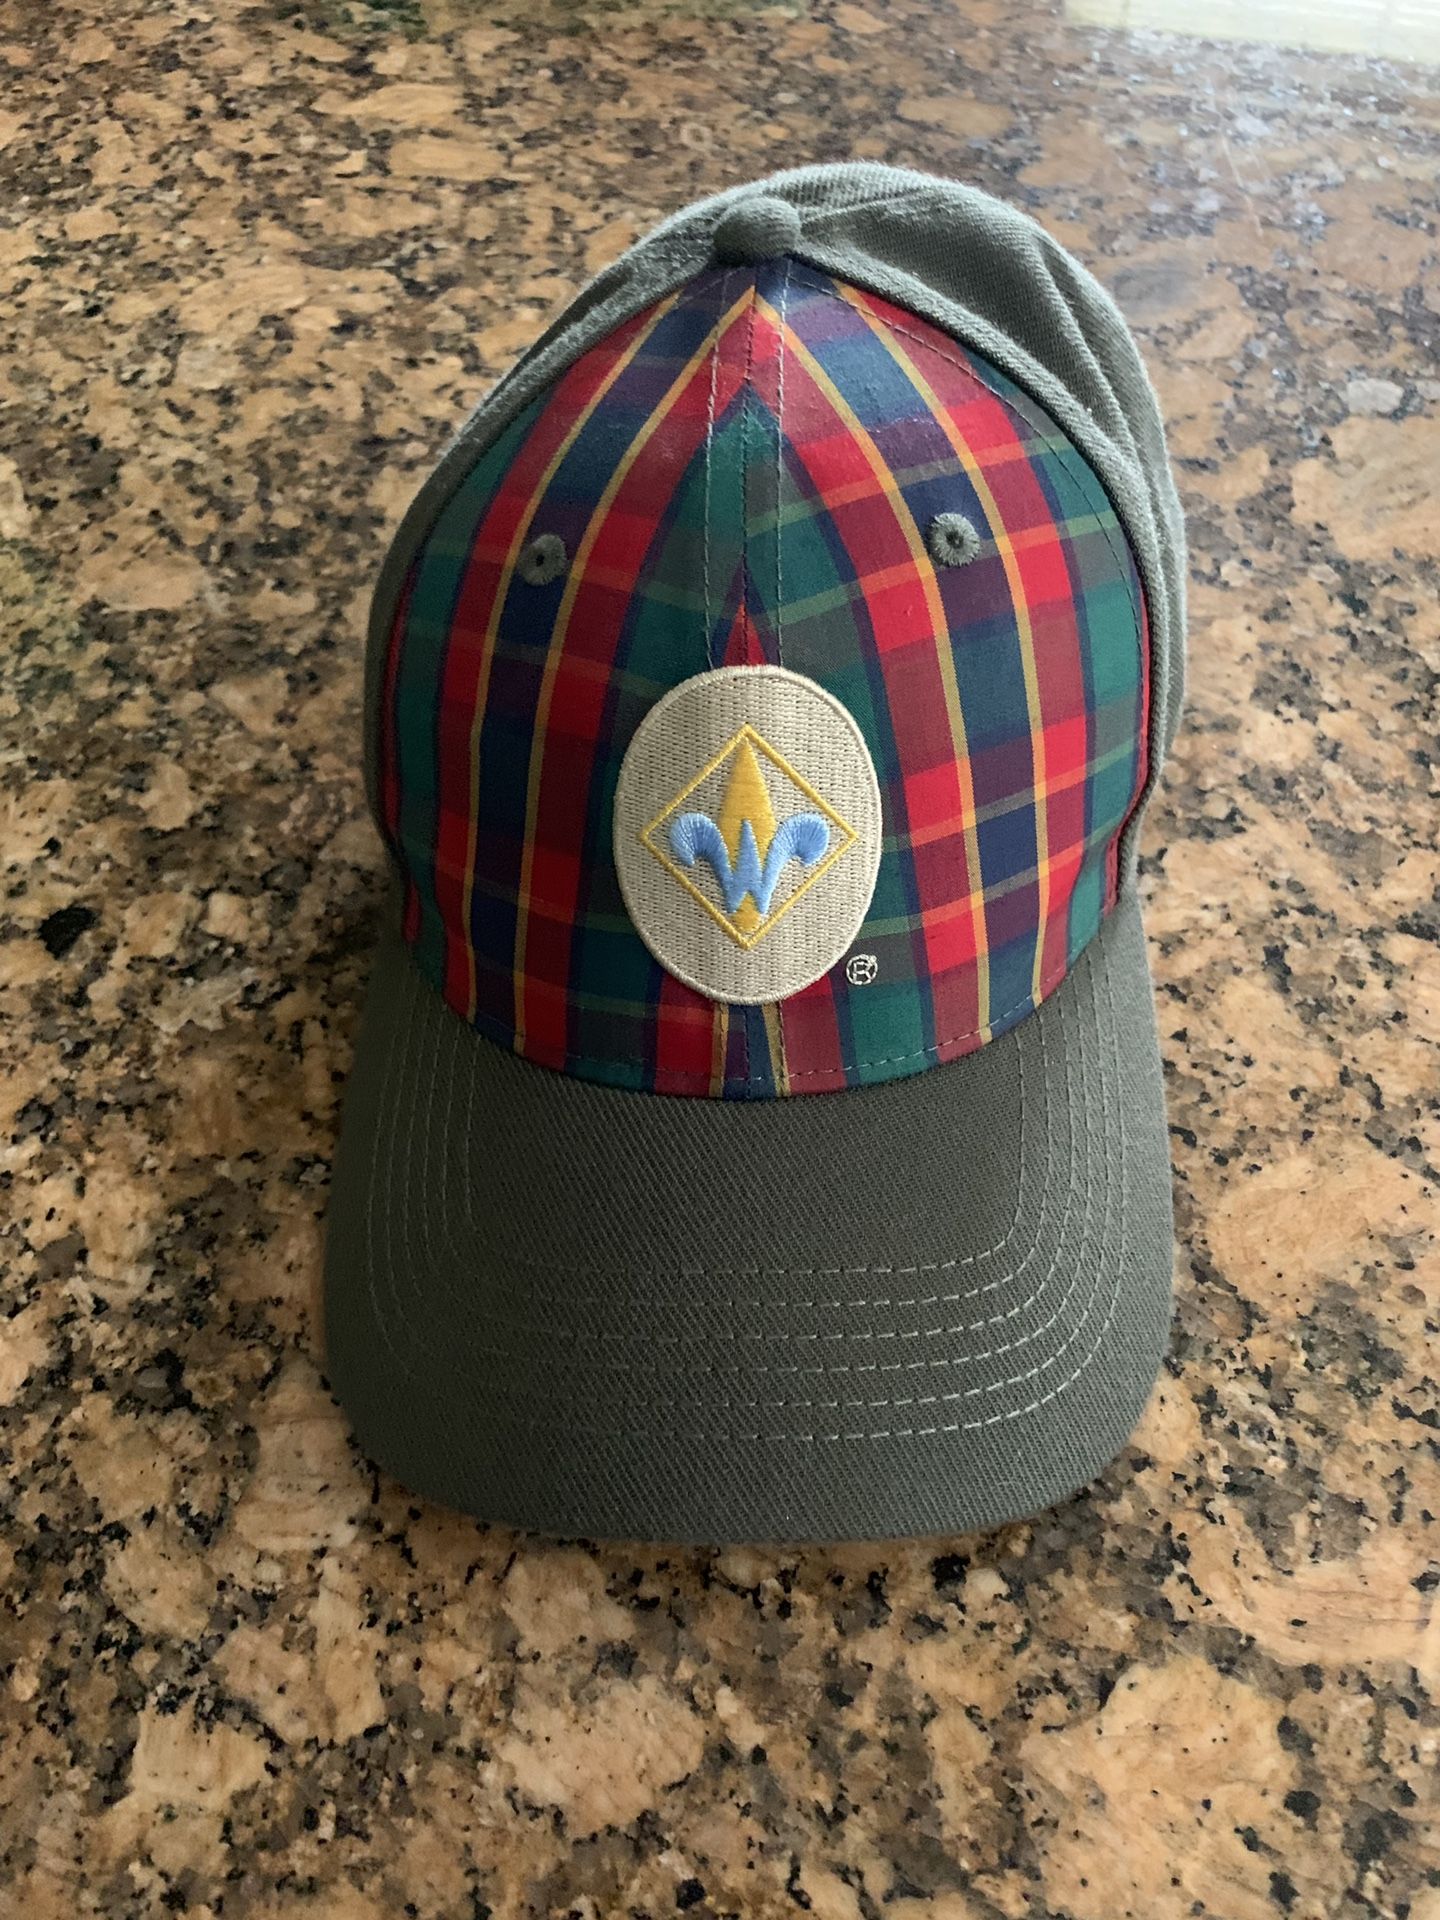 Youth Webelos Scouting Hat